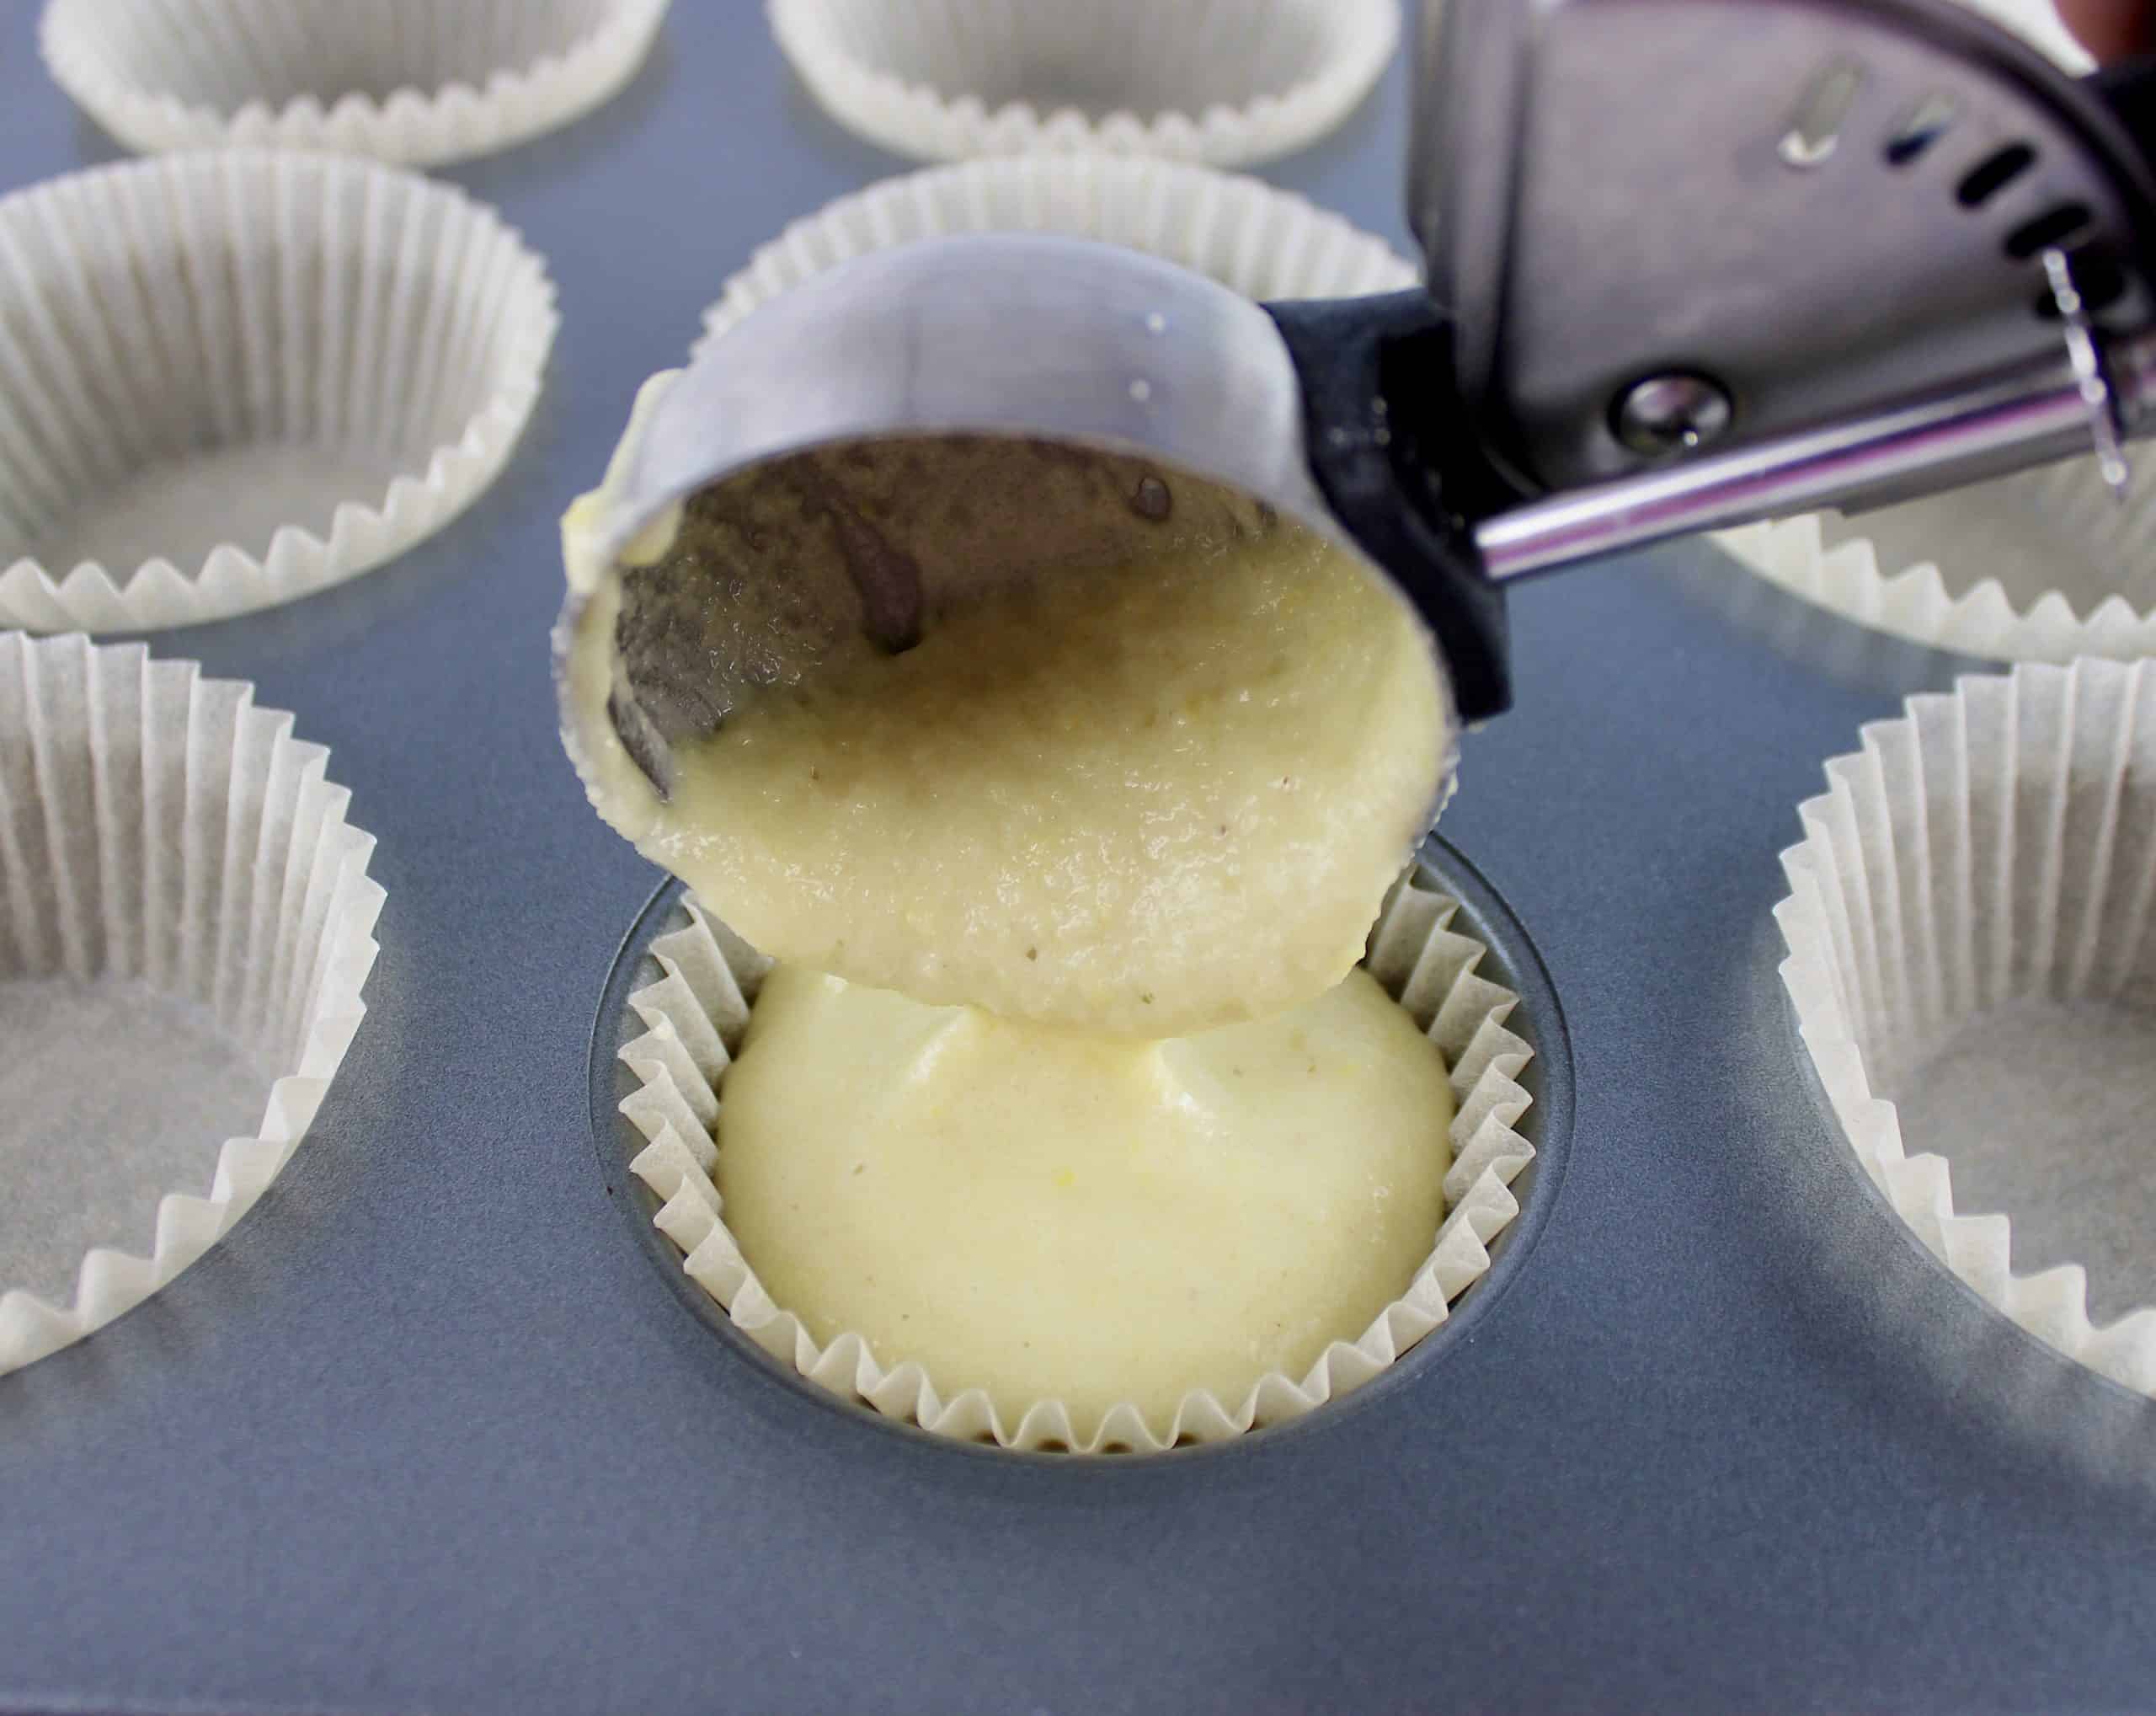 cupcake batter being poured into muffin liners in muffin pan